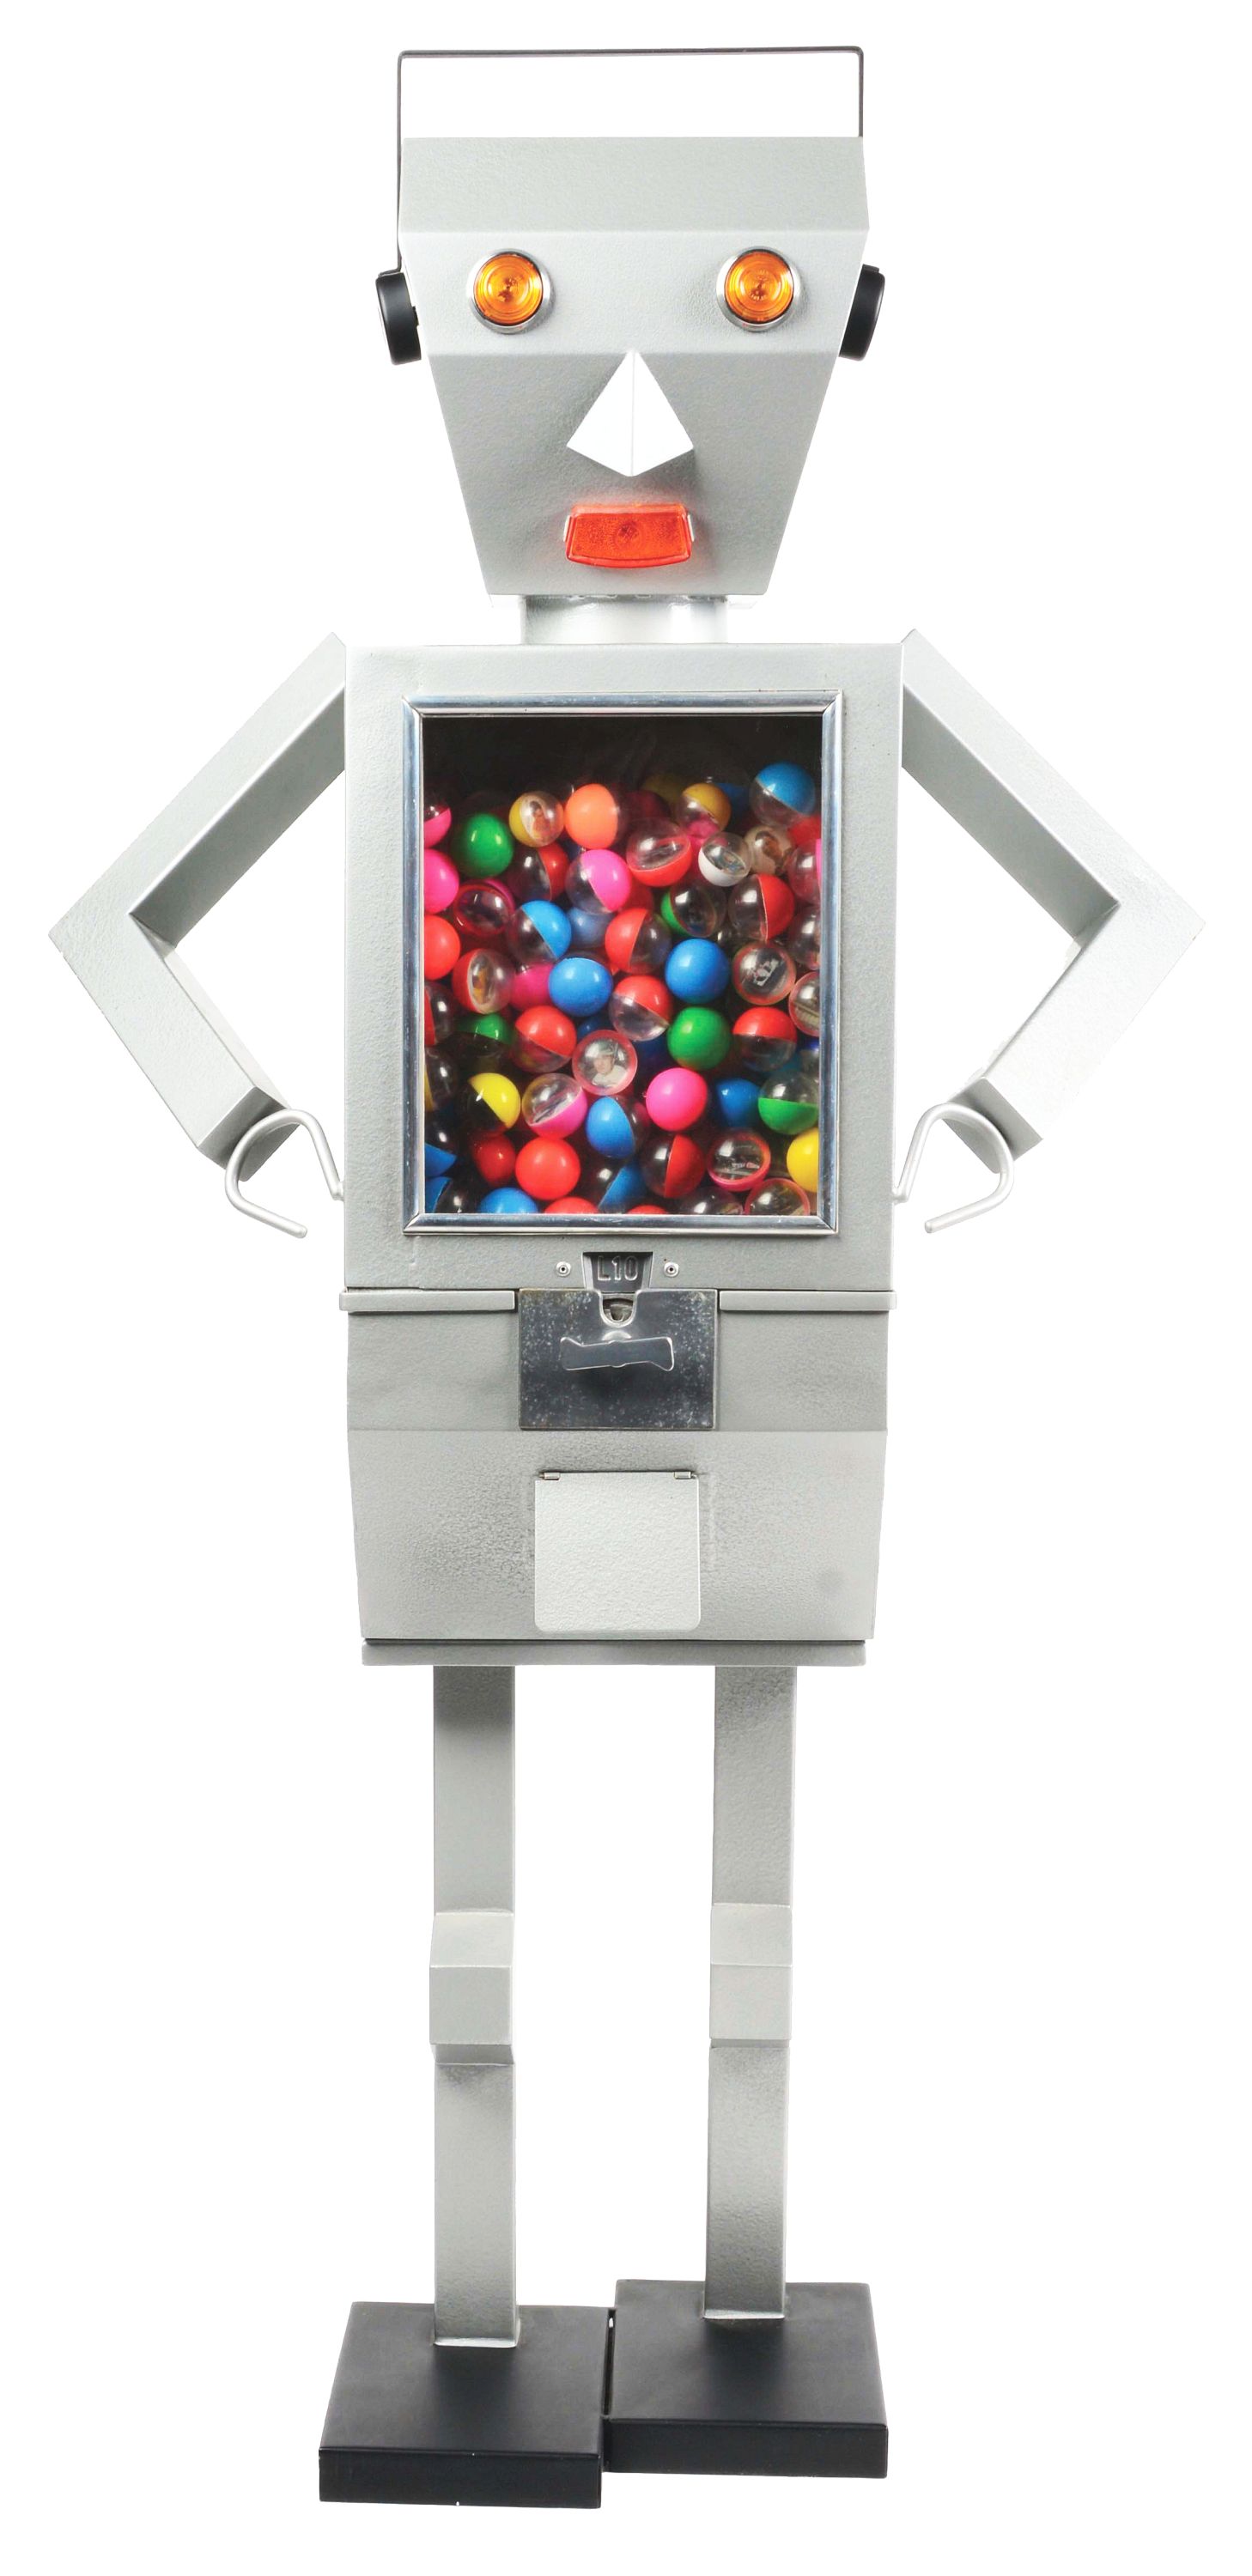 Scarce 1950s Italian gumball vending machine in the form of a 54-inch-tall full-figure robot. Working coin mechanism. Retains prizes inside chest, plus original key for lock. Excellent to Near Mint condition. Estimate $4,000-$8,000